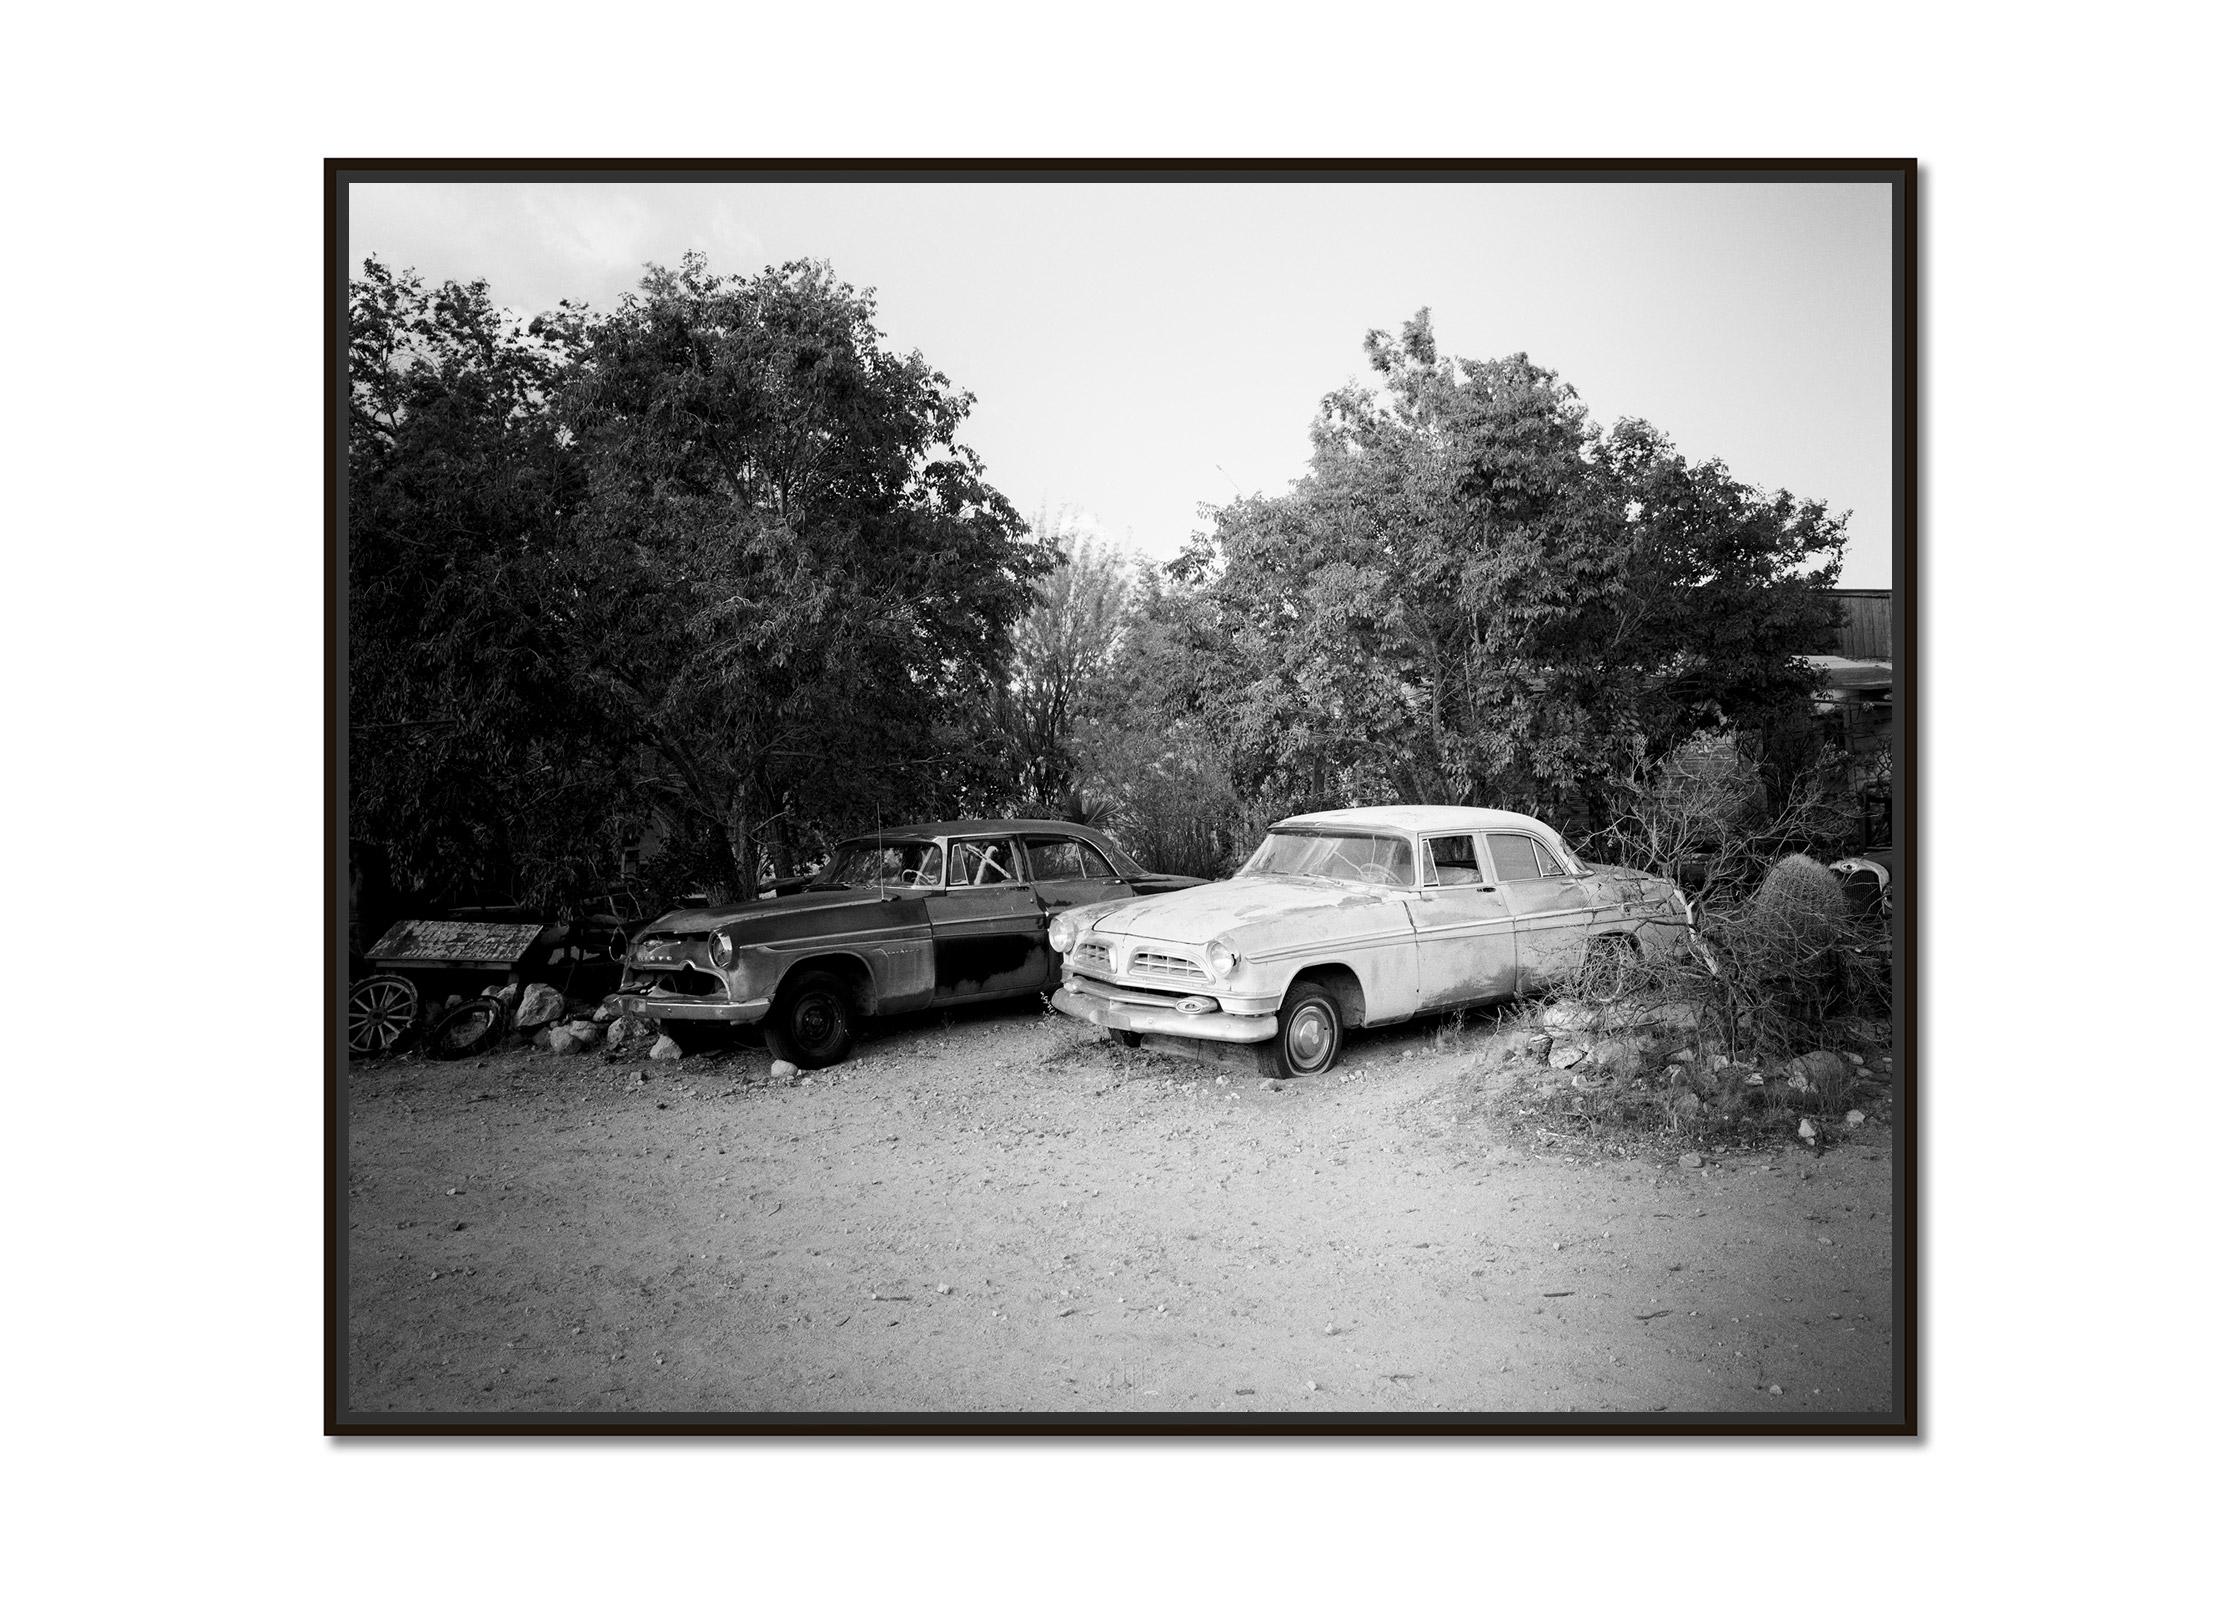 Abandoned Cars, junkyard, California, USA, black and white landscape photography - Photograph by Gerald Berghammer